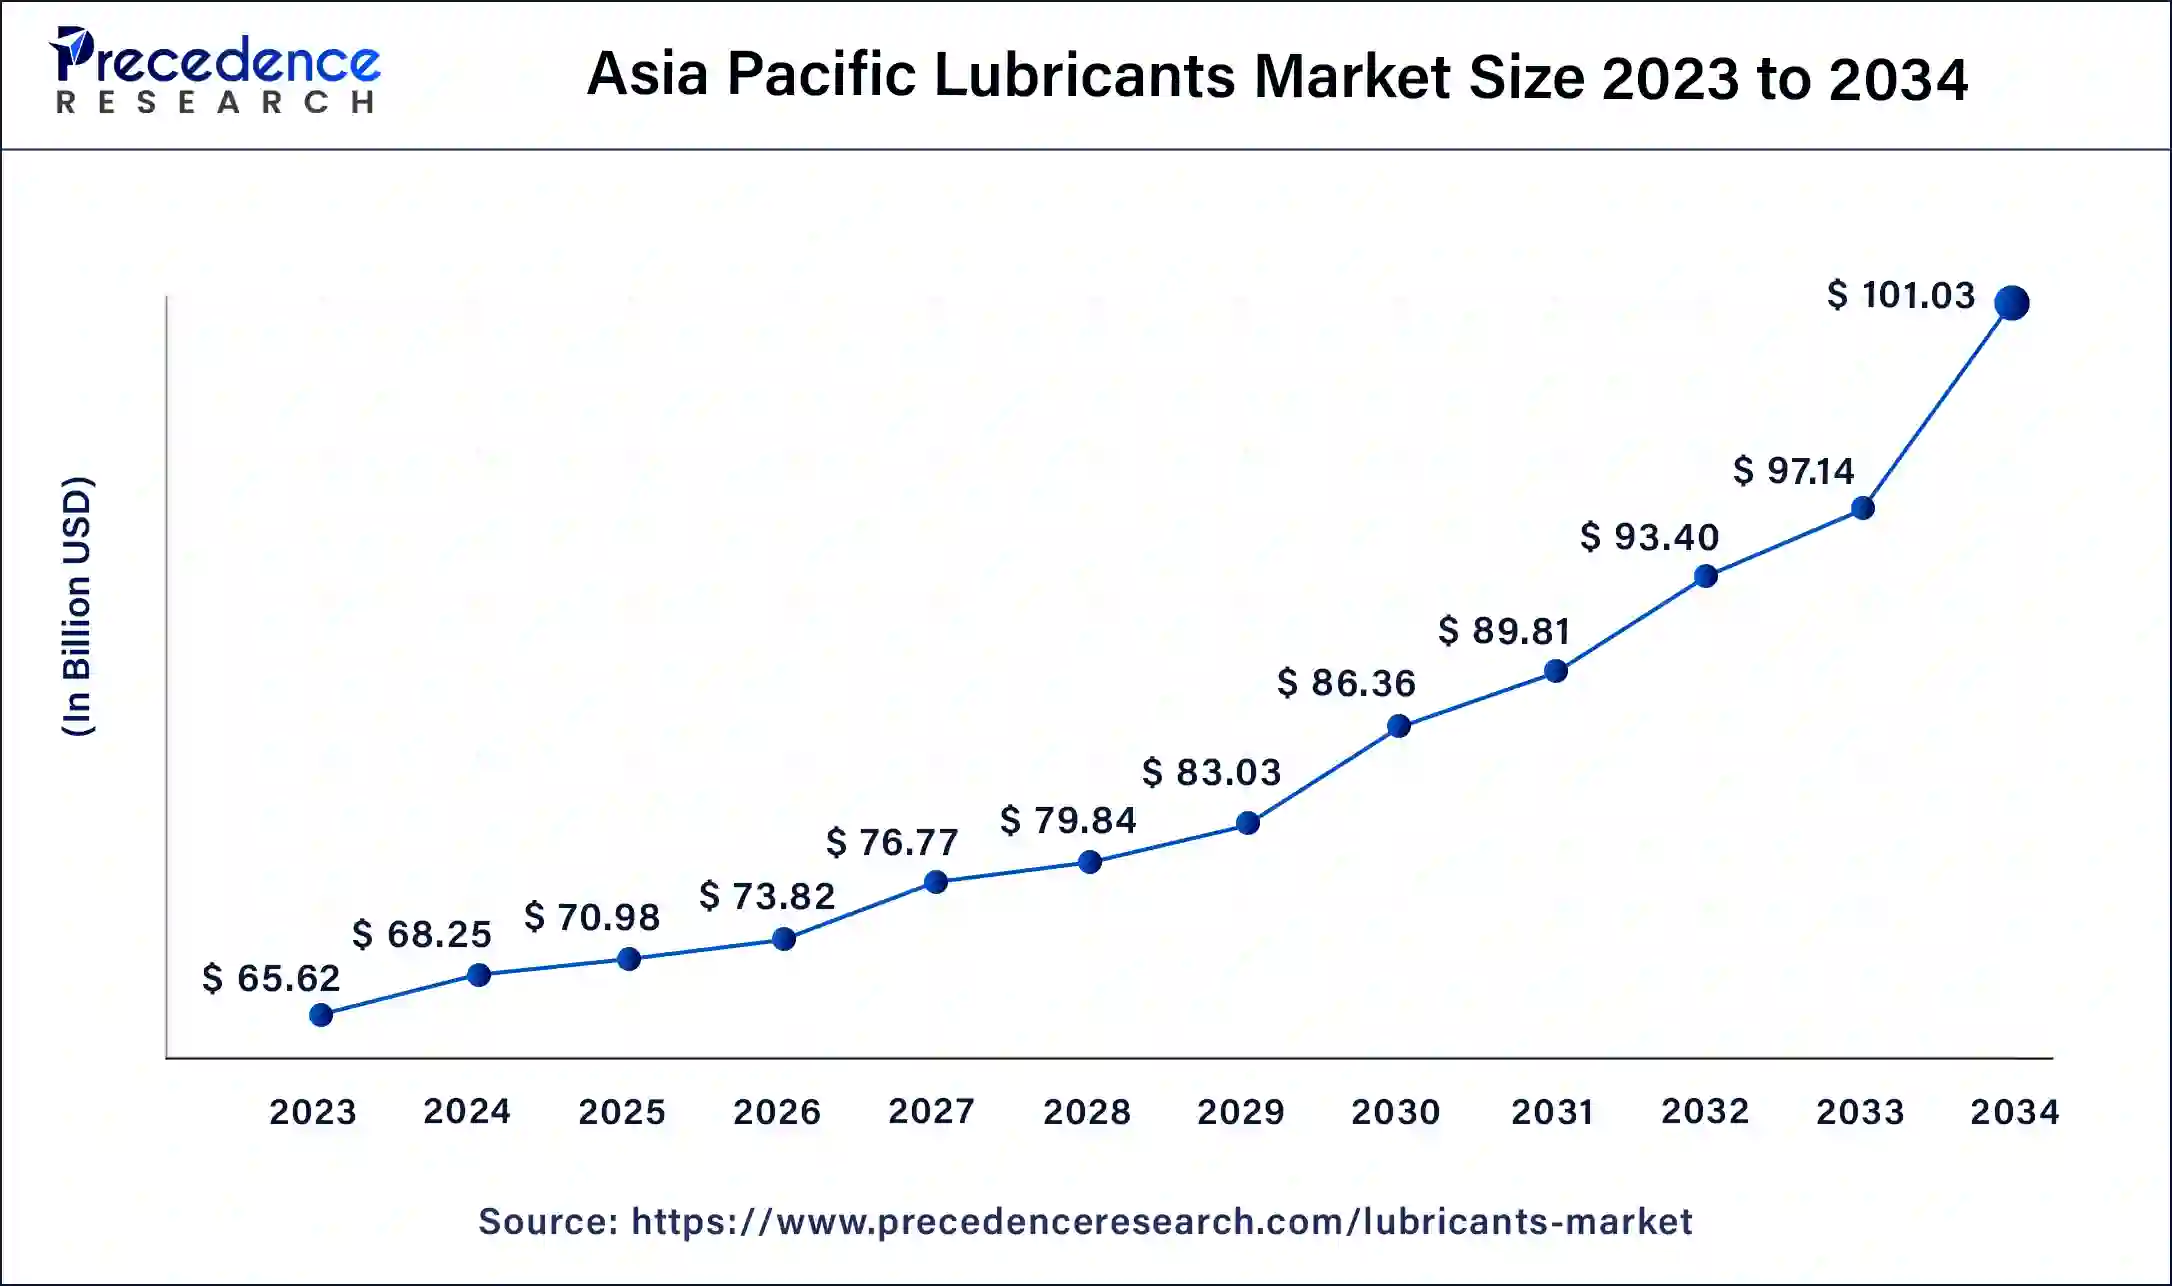 Asia Pacific Lubricants Market Size 2024 to 2034